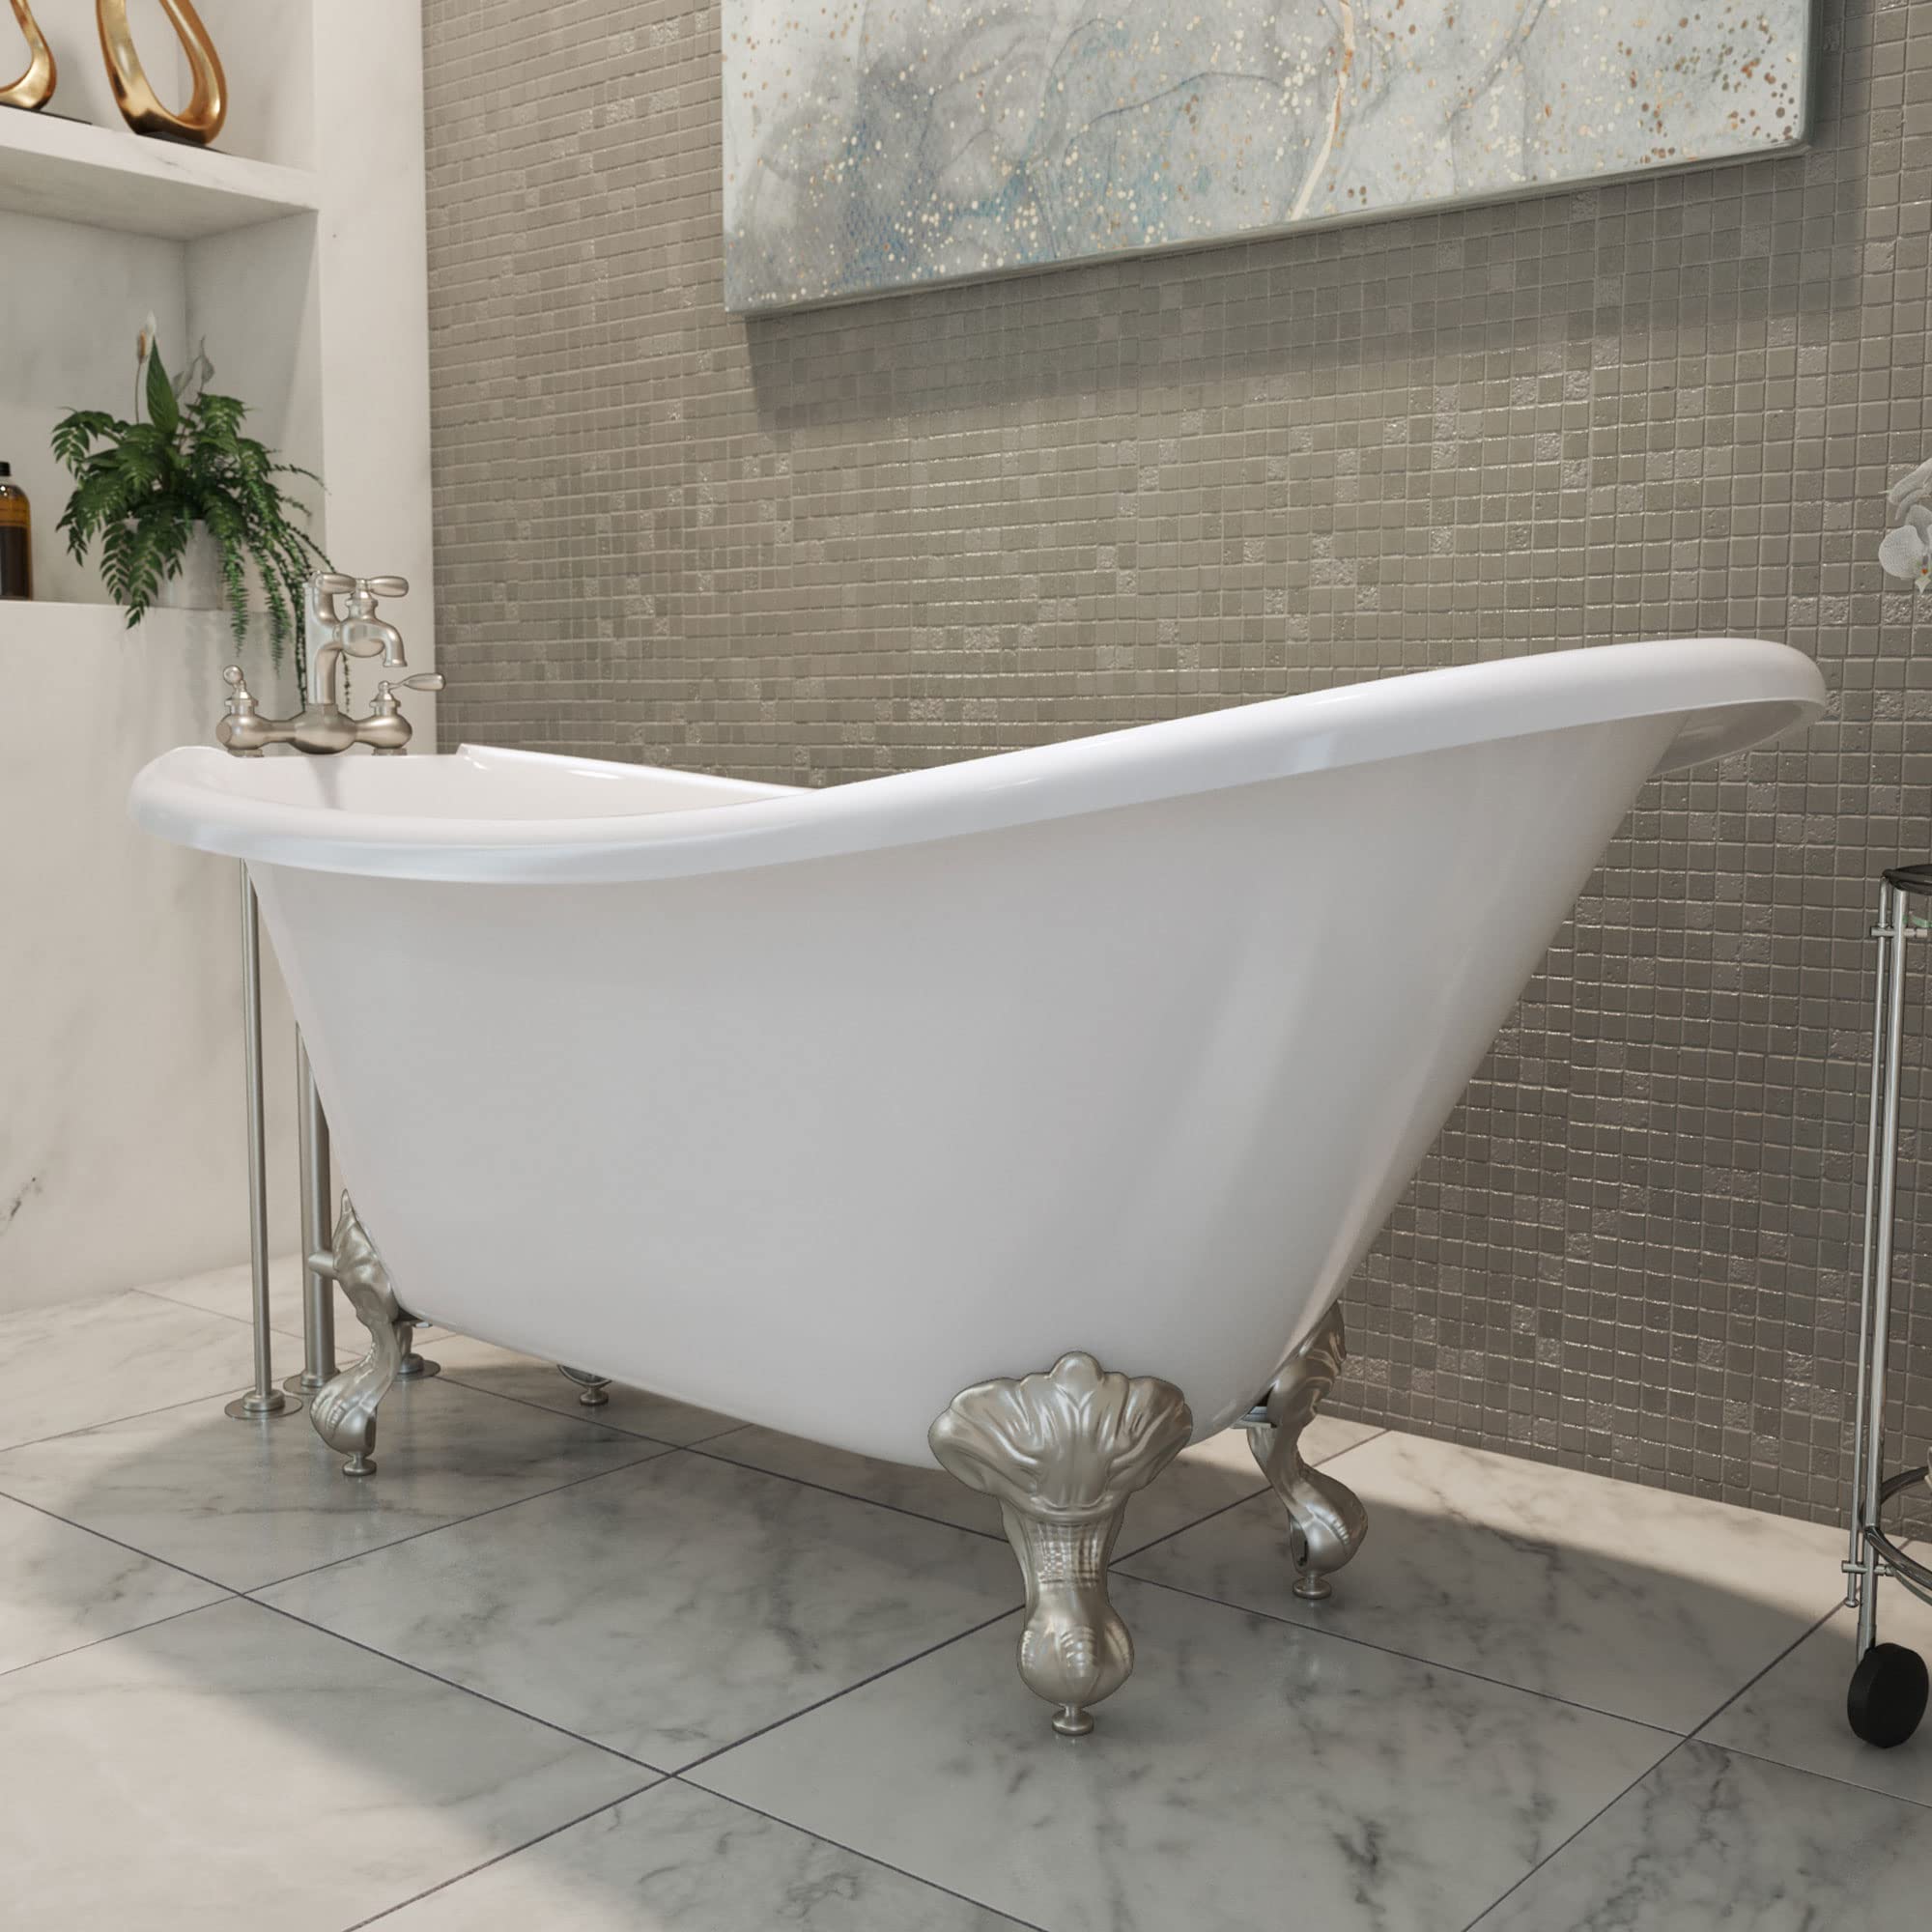 DreamLine Atlantic 61 in. L x 28 in. H Acrylic Freestanding Bathtub with Brushed Nickel Finish